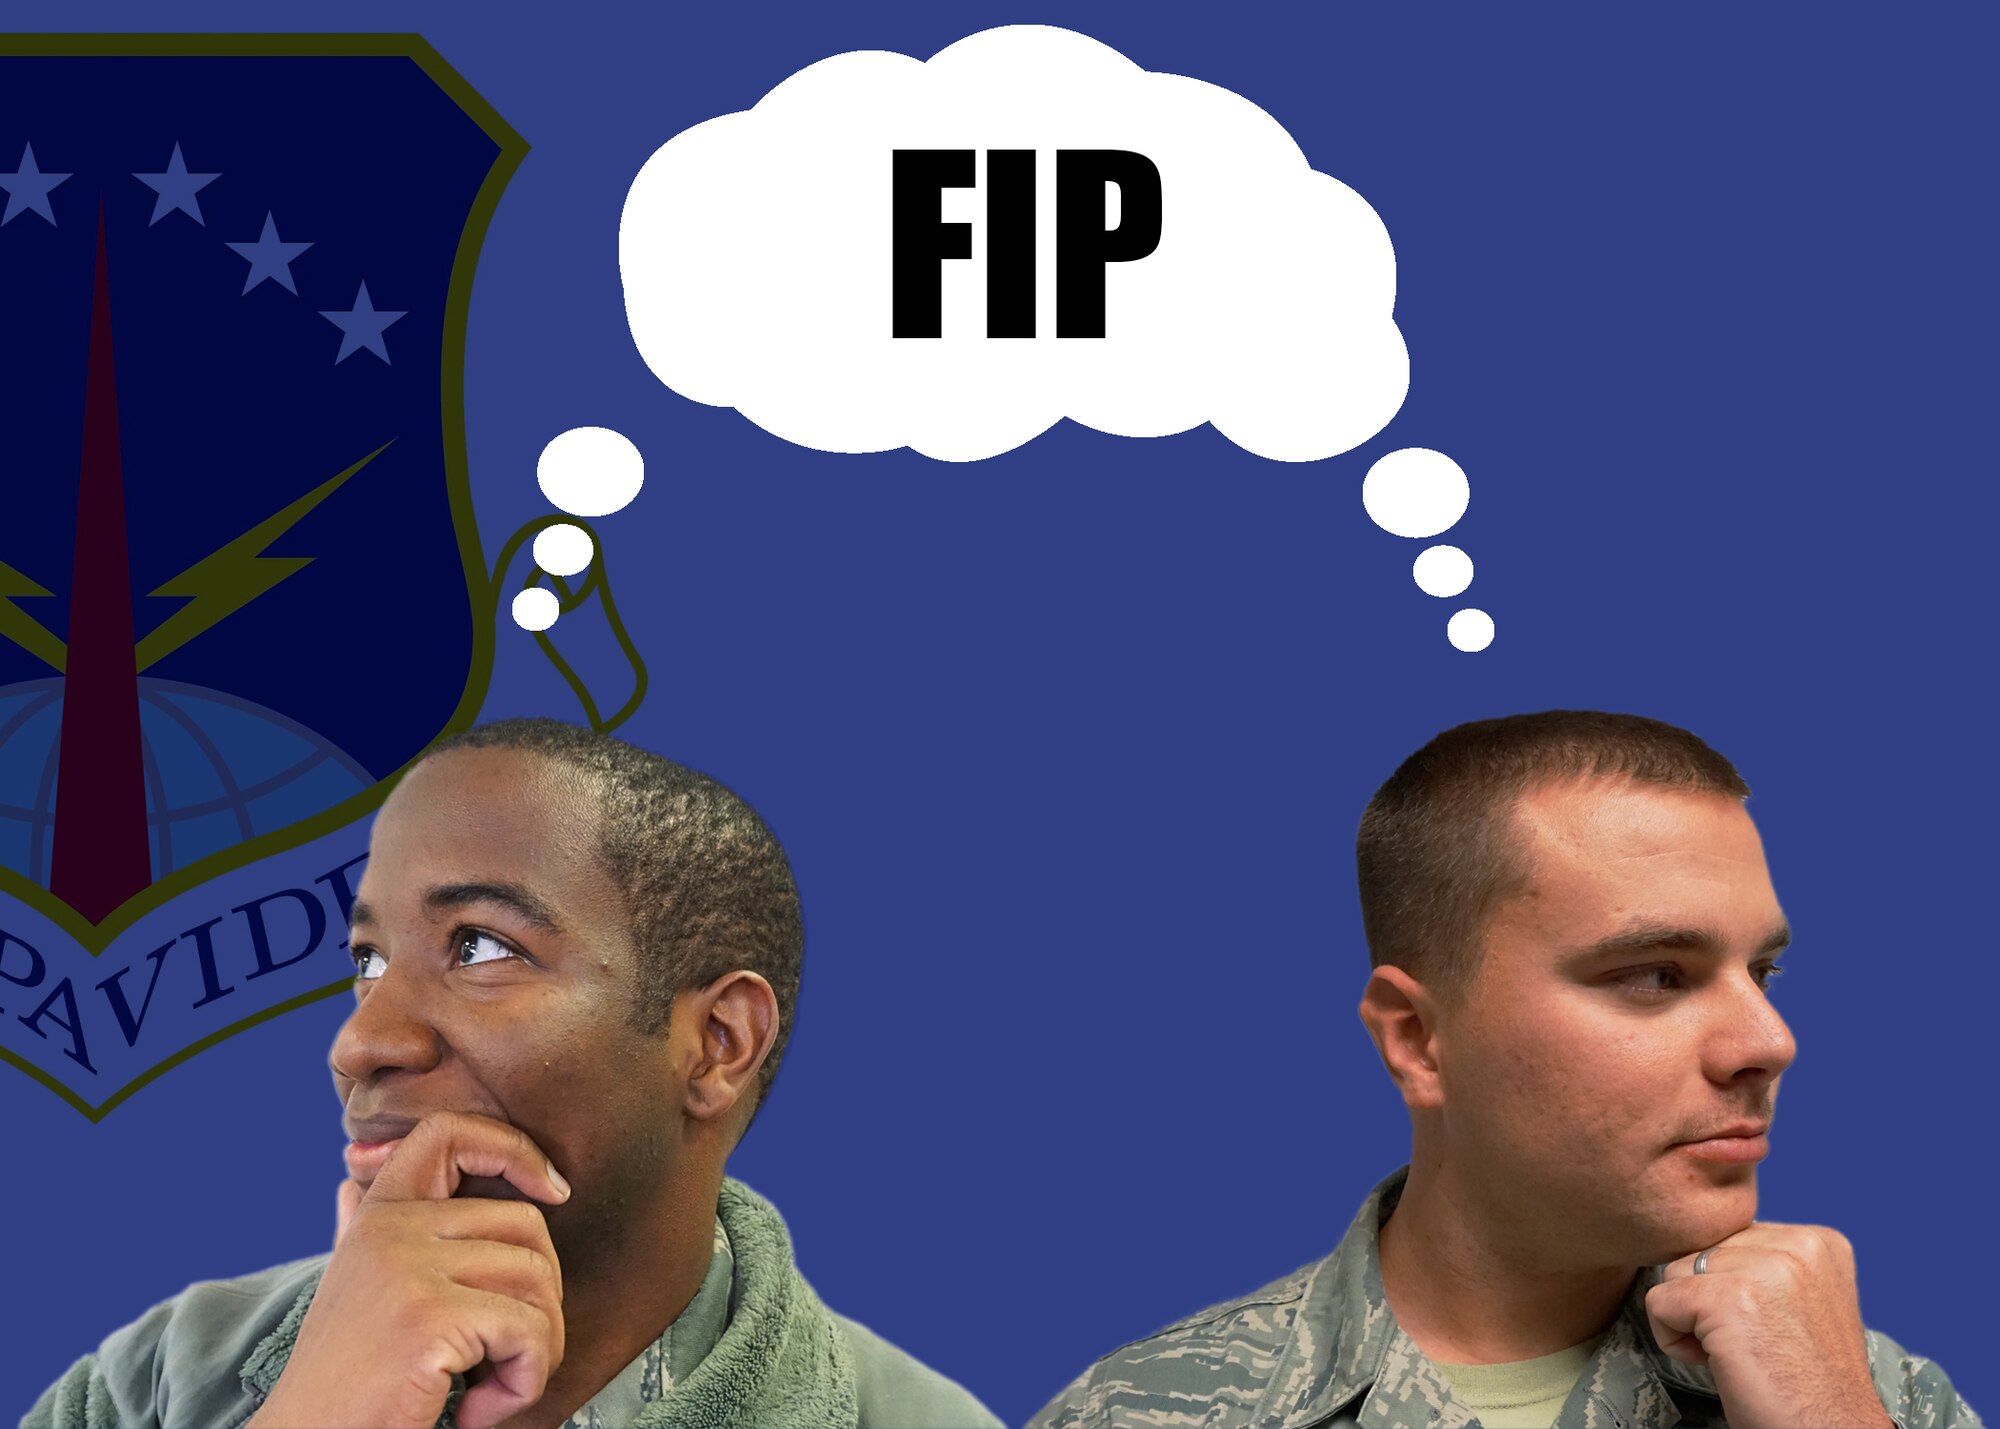 Airman 1st Class Emanuel Williams, 90th Missile Security Forces Squadron, and Senior Airman Stephen Carlson, 90th Missile Maintenance Squadron, ponder about their thoughts on the Force Improvement Program. FIP is an aggressive grass-roots feedback program designed to quickly provide senior Air Force leaders with actionable recommendations for improvement by conducting one-on-one interviews and surveys with Airmen. The feedback received so far has brought changes to a variety of career fields vital to the nuclear deterence mission and has been positively received by those affected. (U.S. Air Force graphic/Lan Kim)